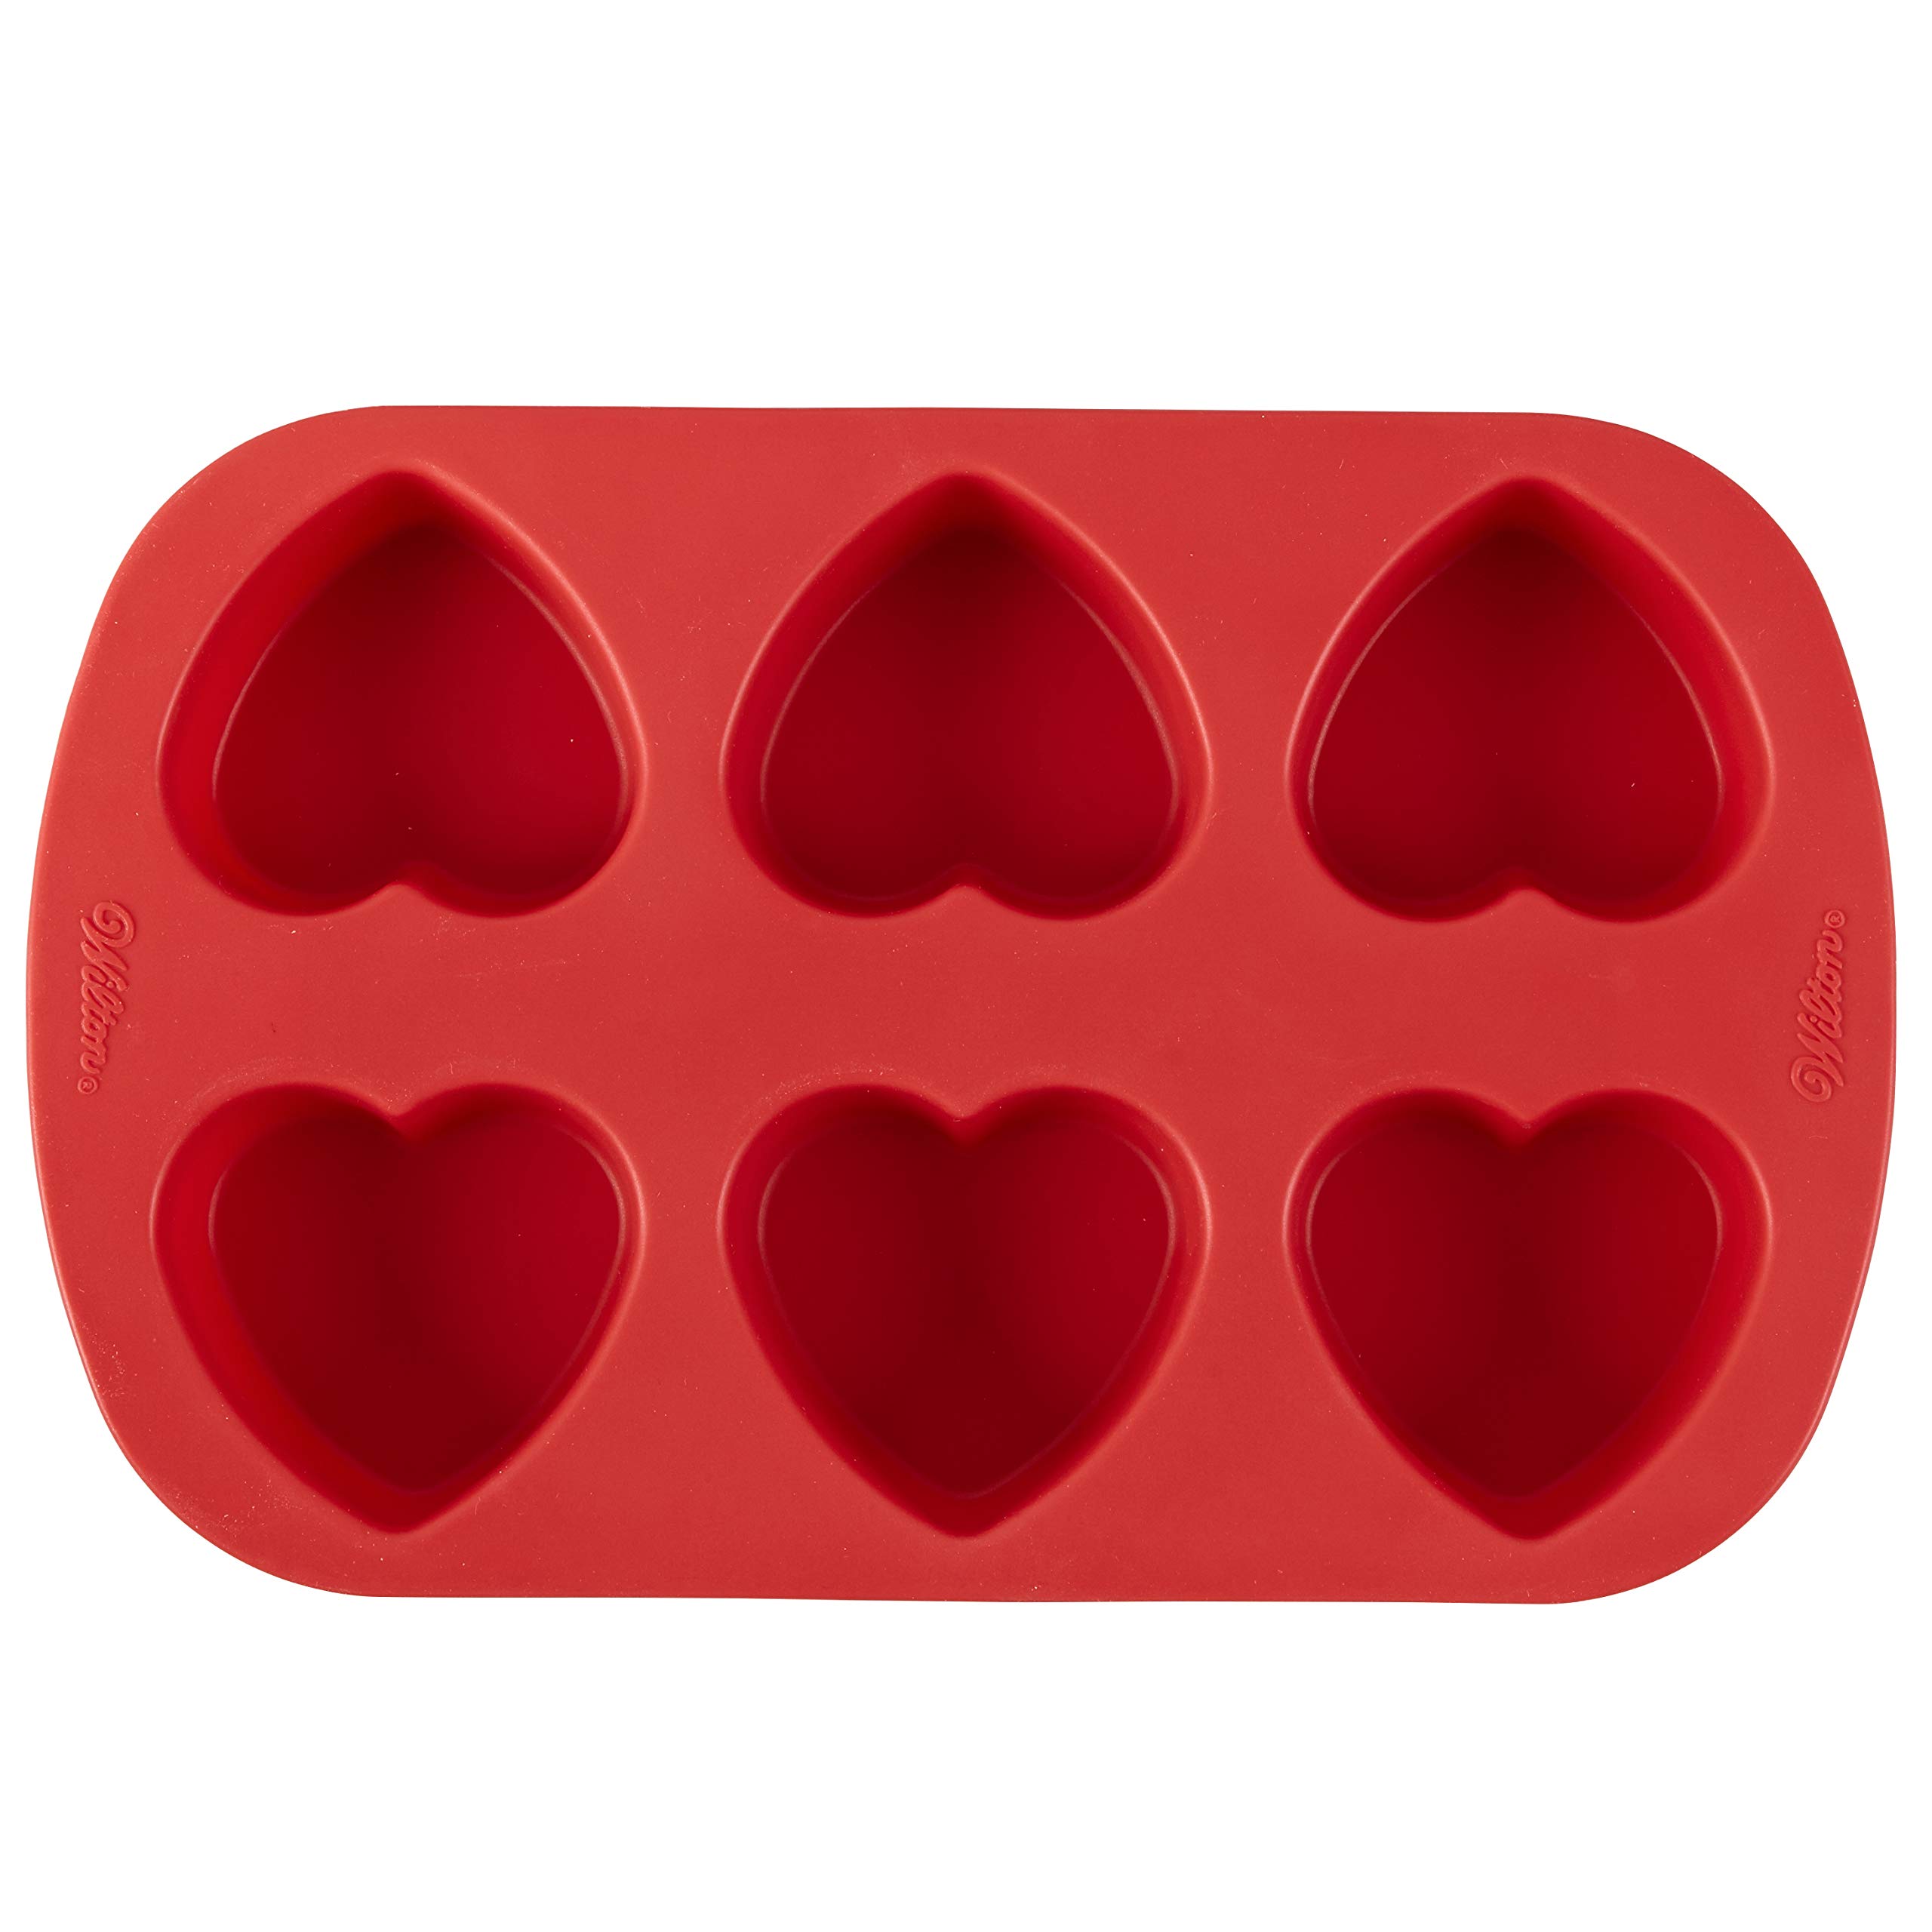 Wilton Mini Silicone Heart Mold, 6-Cavity Silicone Mold for Heart Shaped Cookies and Candy, Red